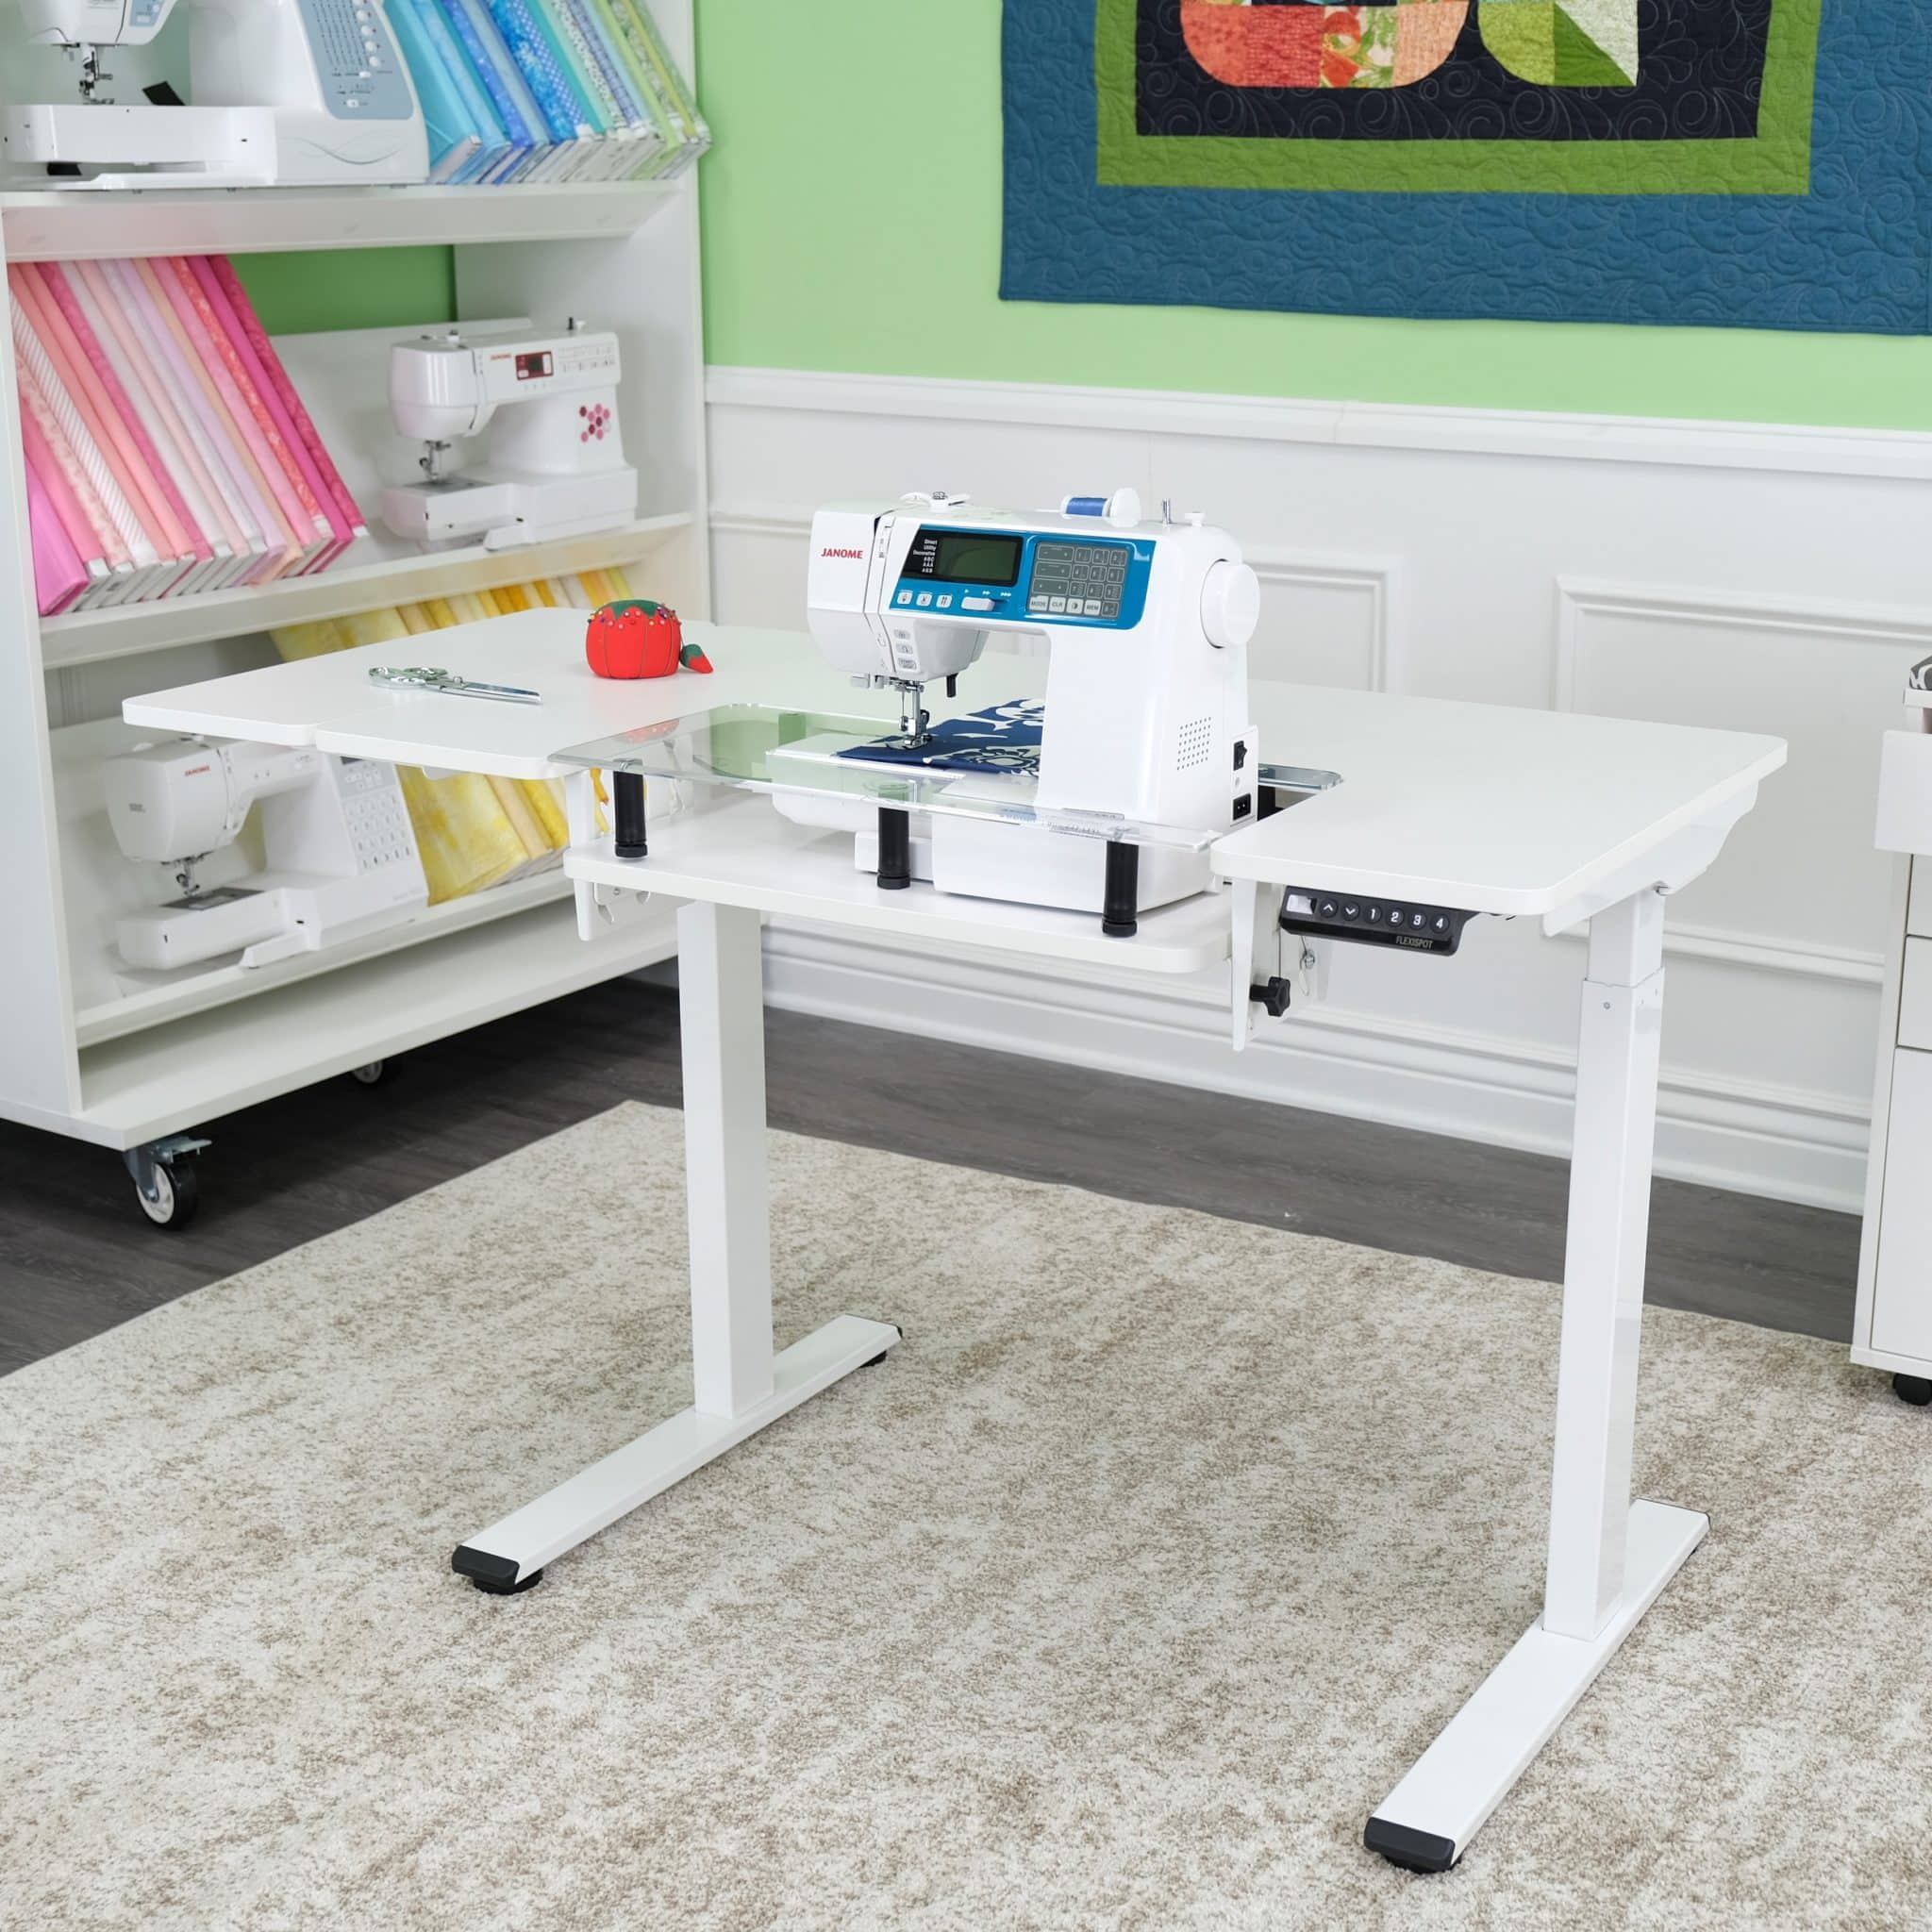 Eleanor Serger & Sewing Table is an electric, height-adjustable table by Arrow Classic Sewing Furniture. Can be doubled as a primary office desk.